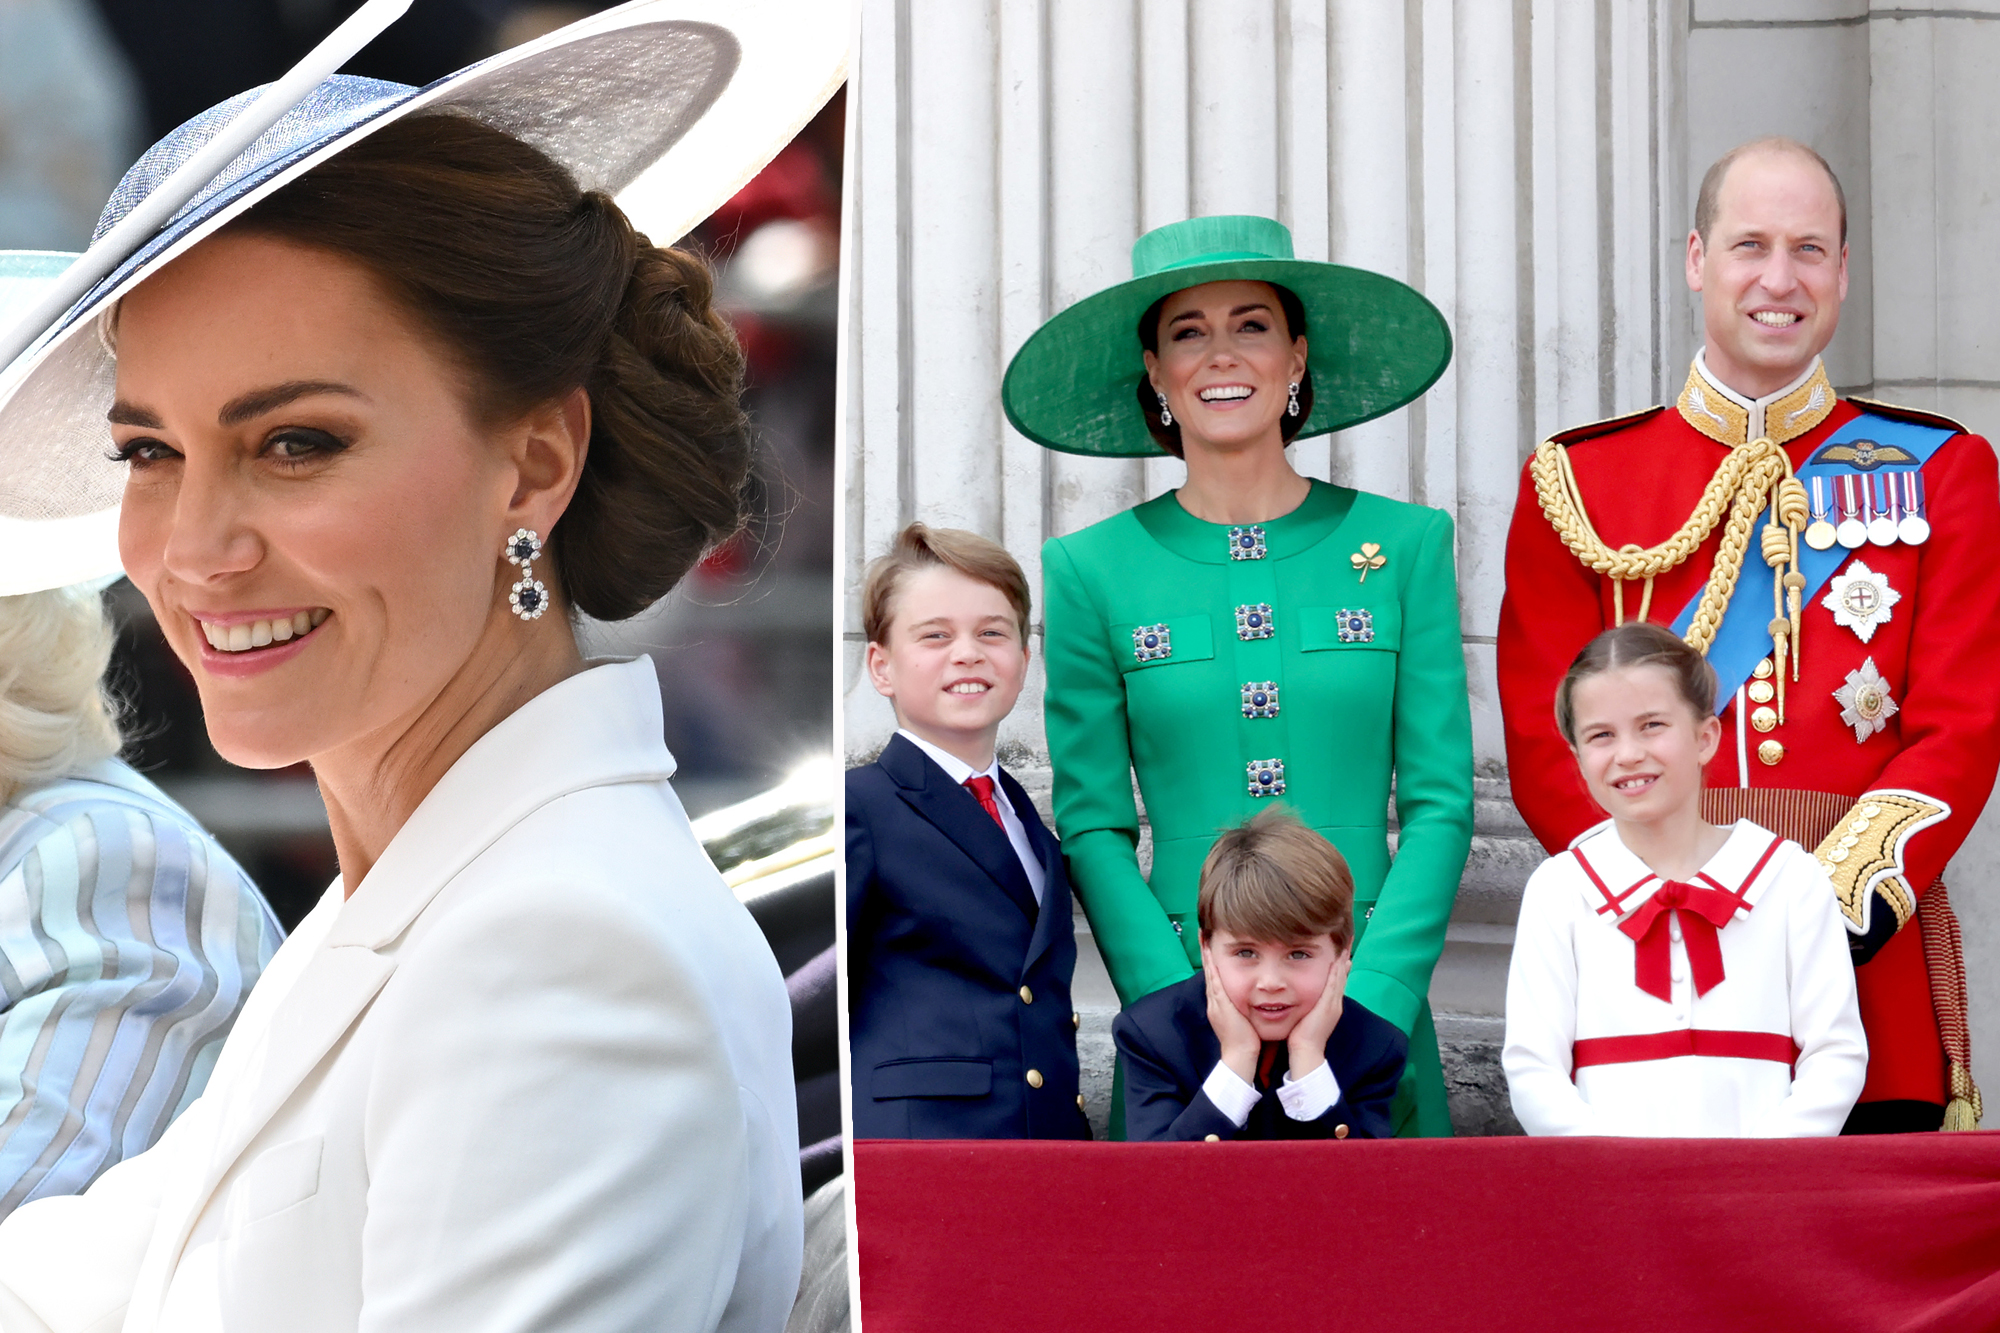 Kate Middleton's Apology and Ongoing Battle: A Story of Resilience and Hope